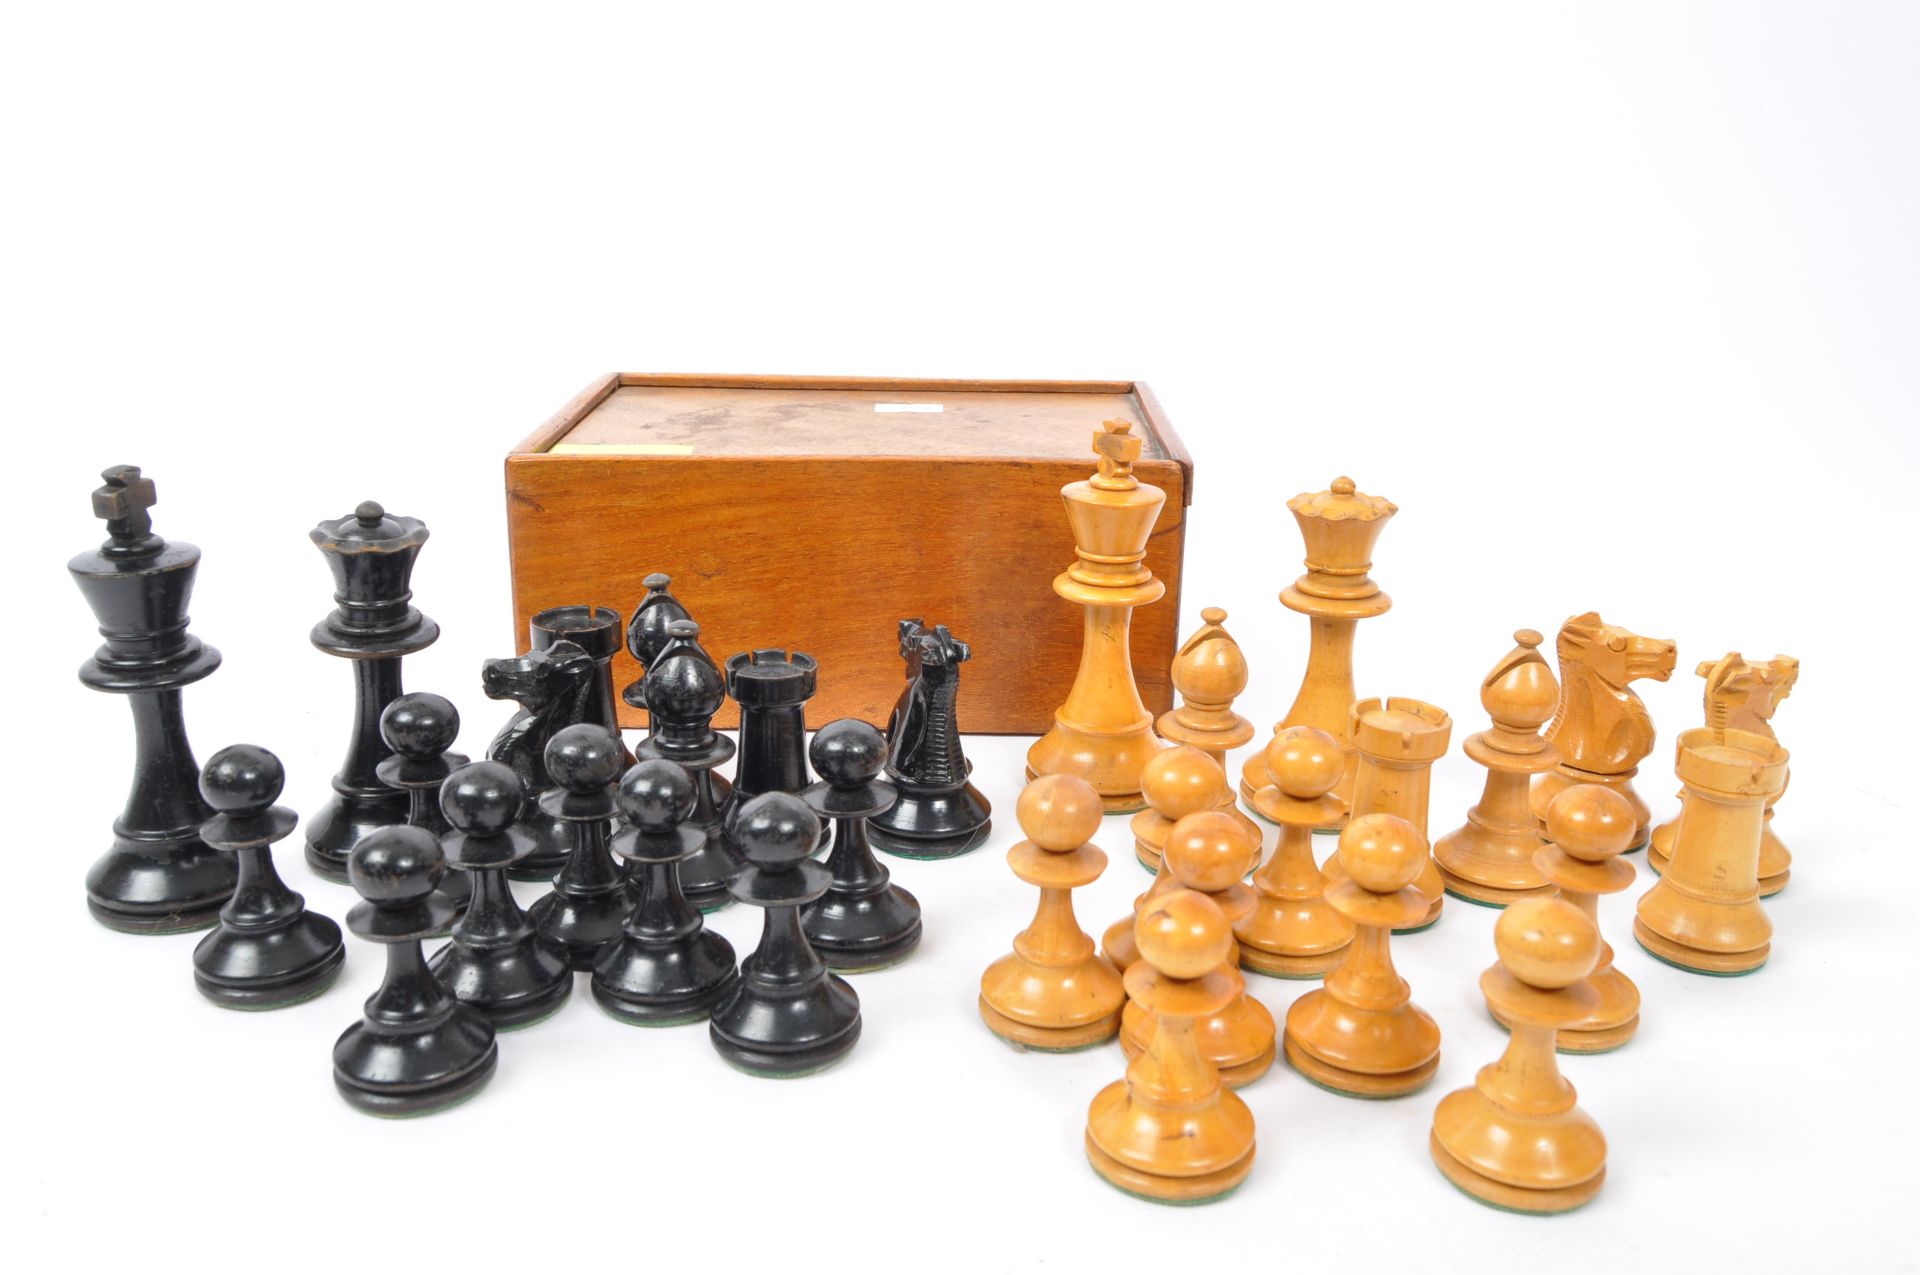 EARLY 20TH CENTURY FISCHER STYLE CHESS SET